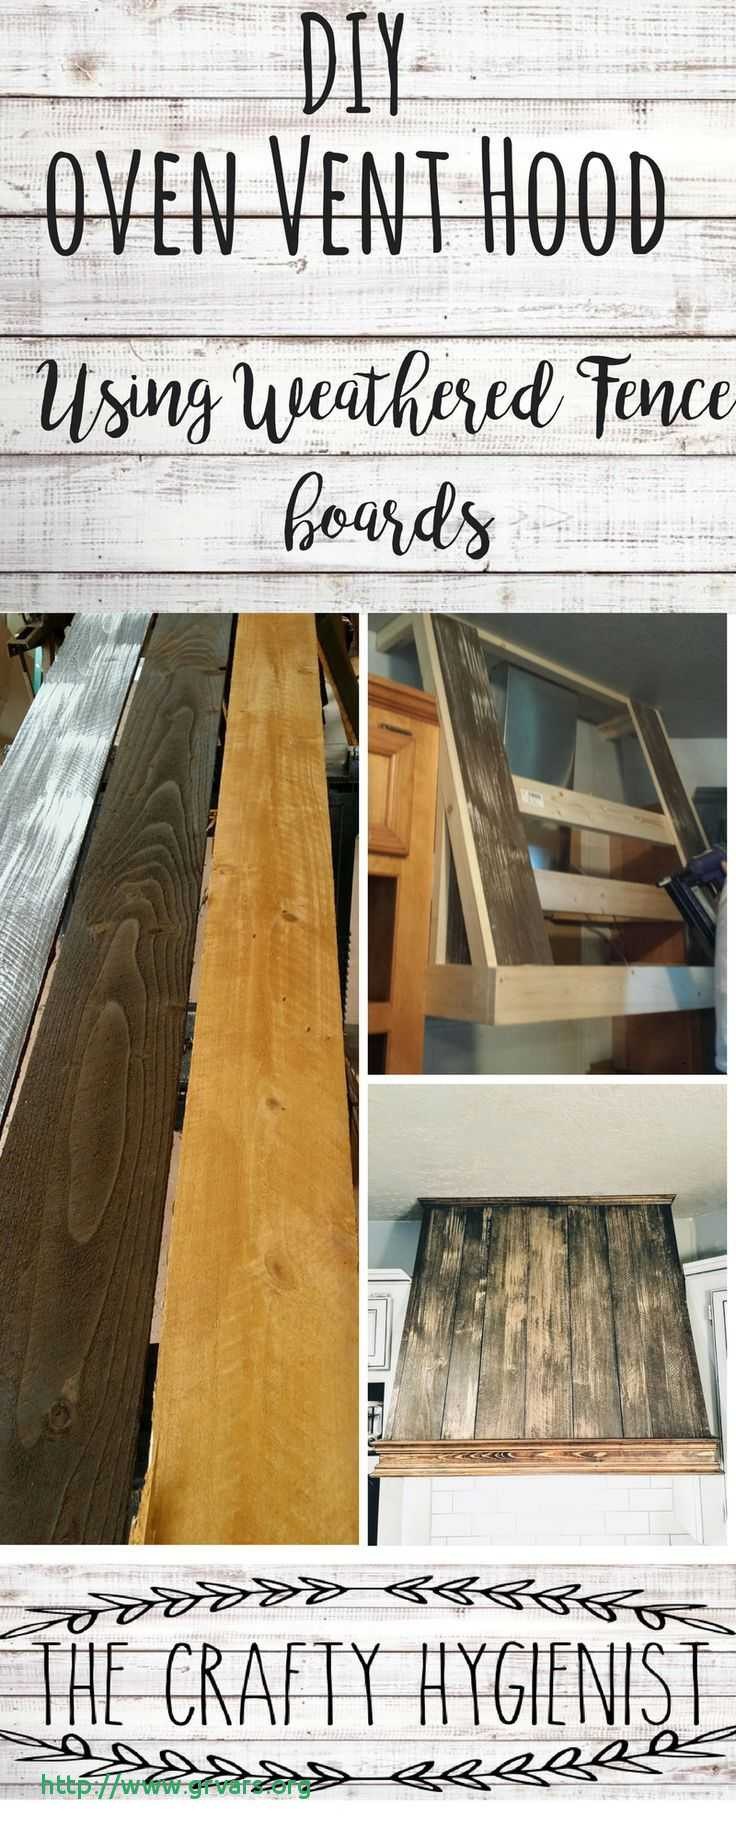 20 Fantastic Hickory Hardwood Floor Vents 2024 free download hickory hardwood floor vents of covering floor vents with furniture nouveau deflecto vent covers inside covering floor vents with furniture luxe vent hood made out of weathered cedar fence b